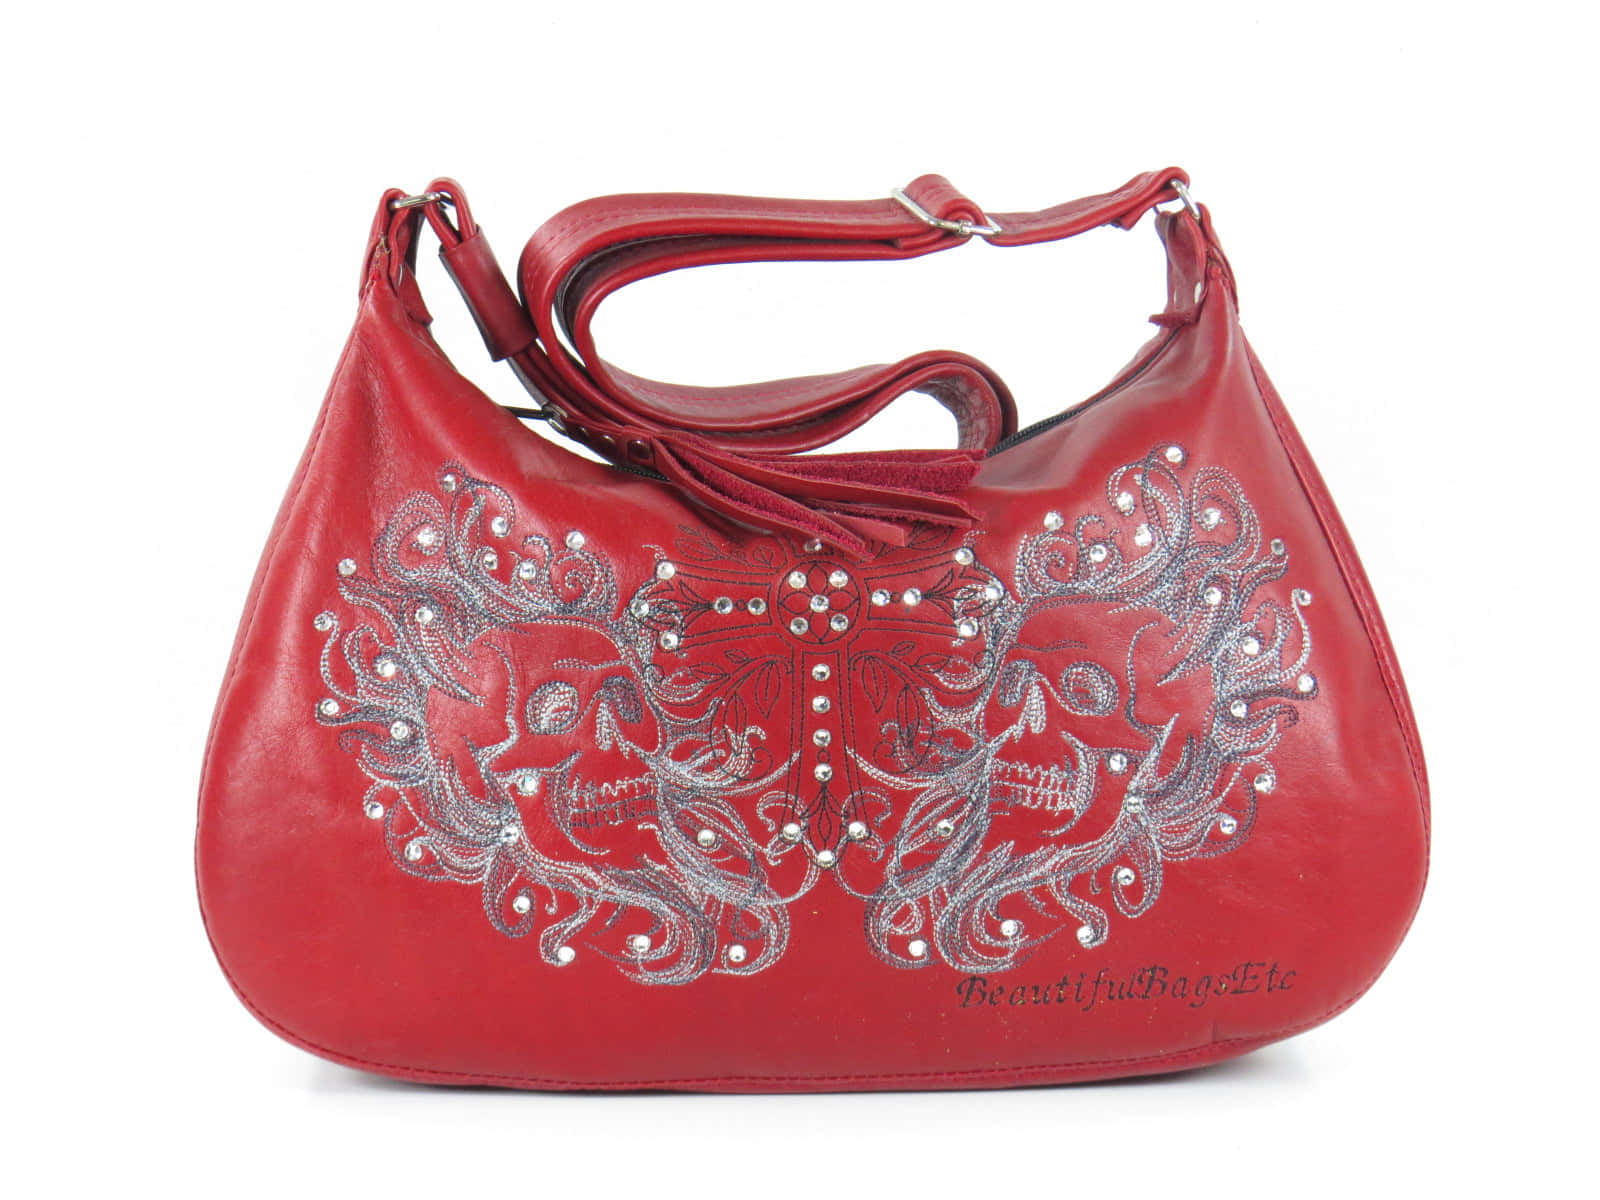 Chic Red Handbag on a white background Wallpaper